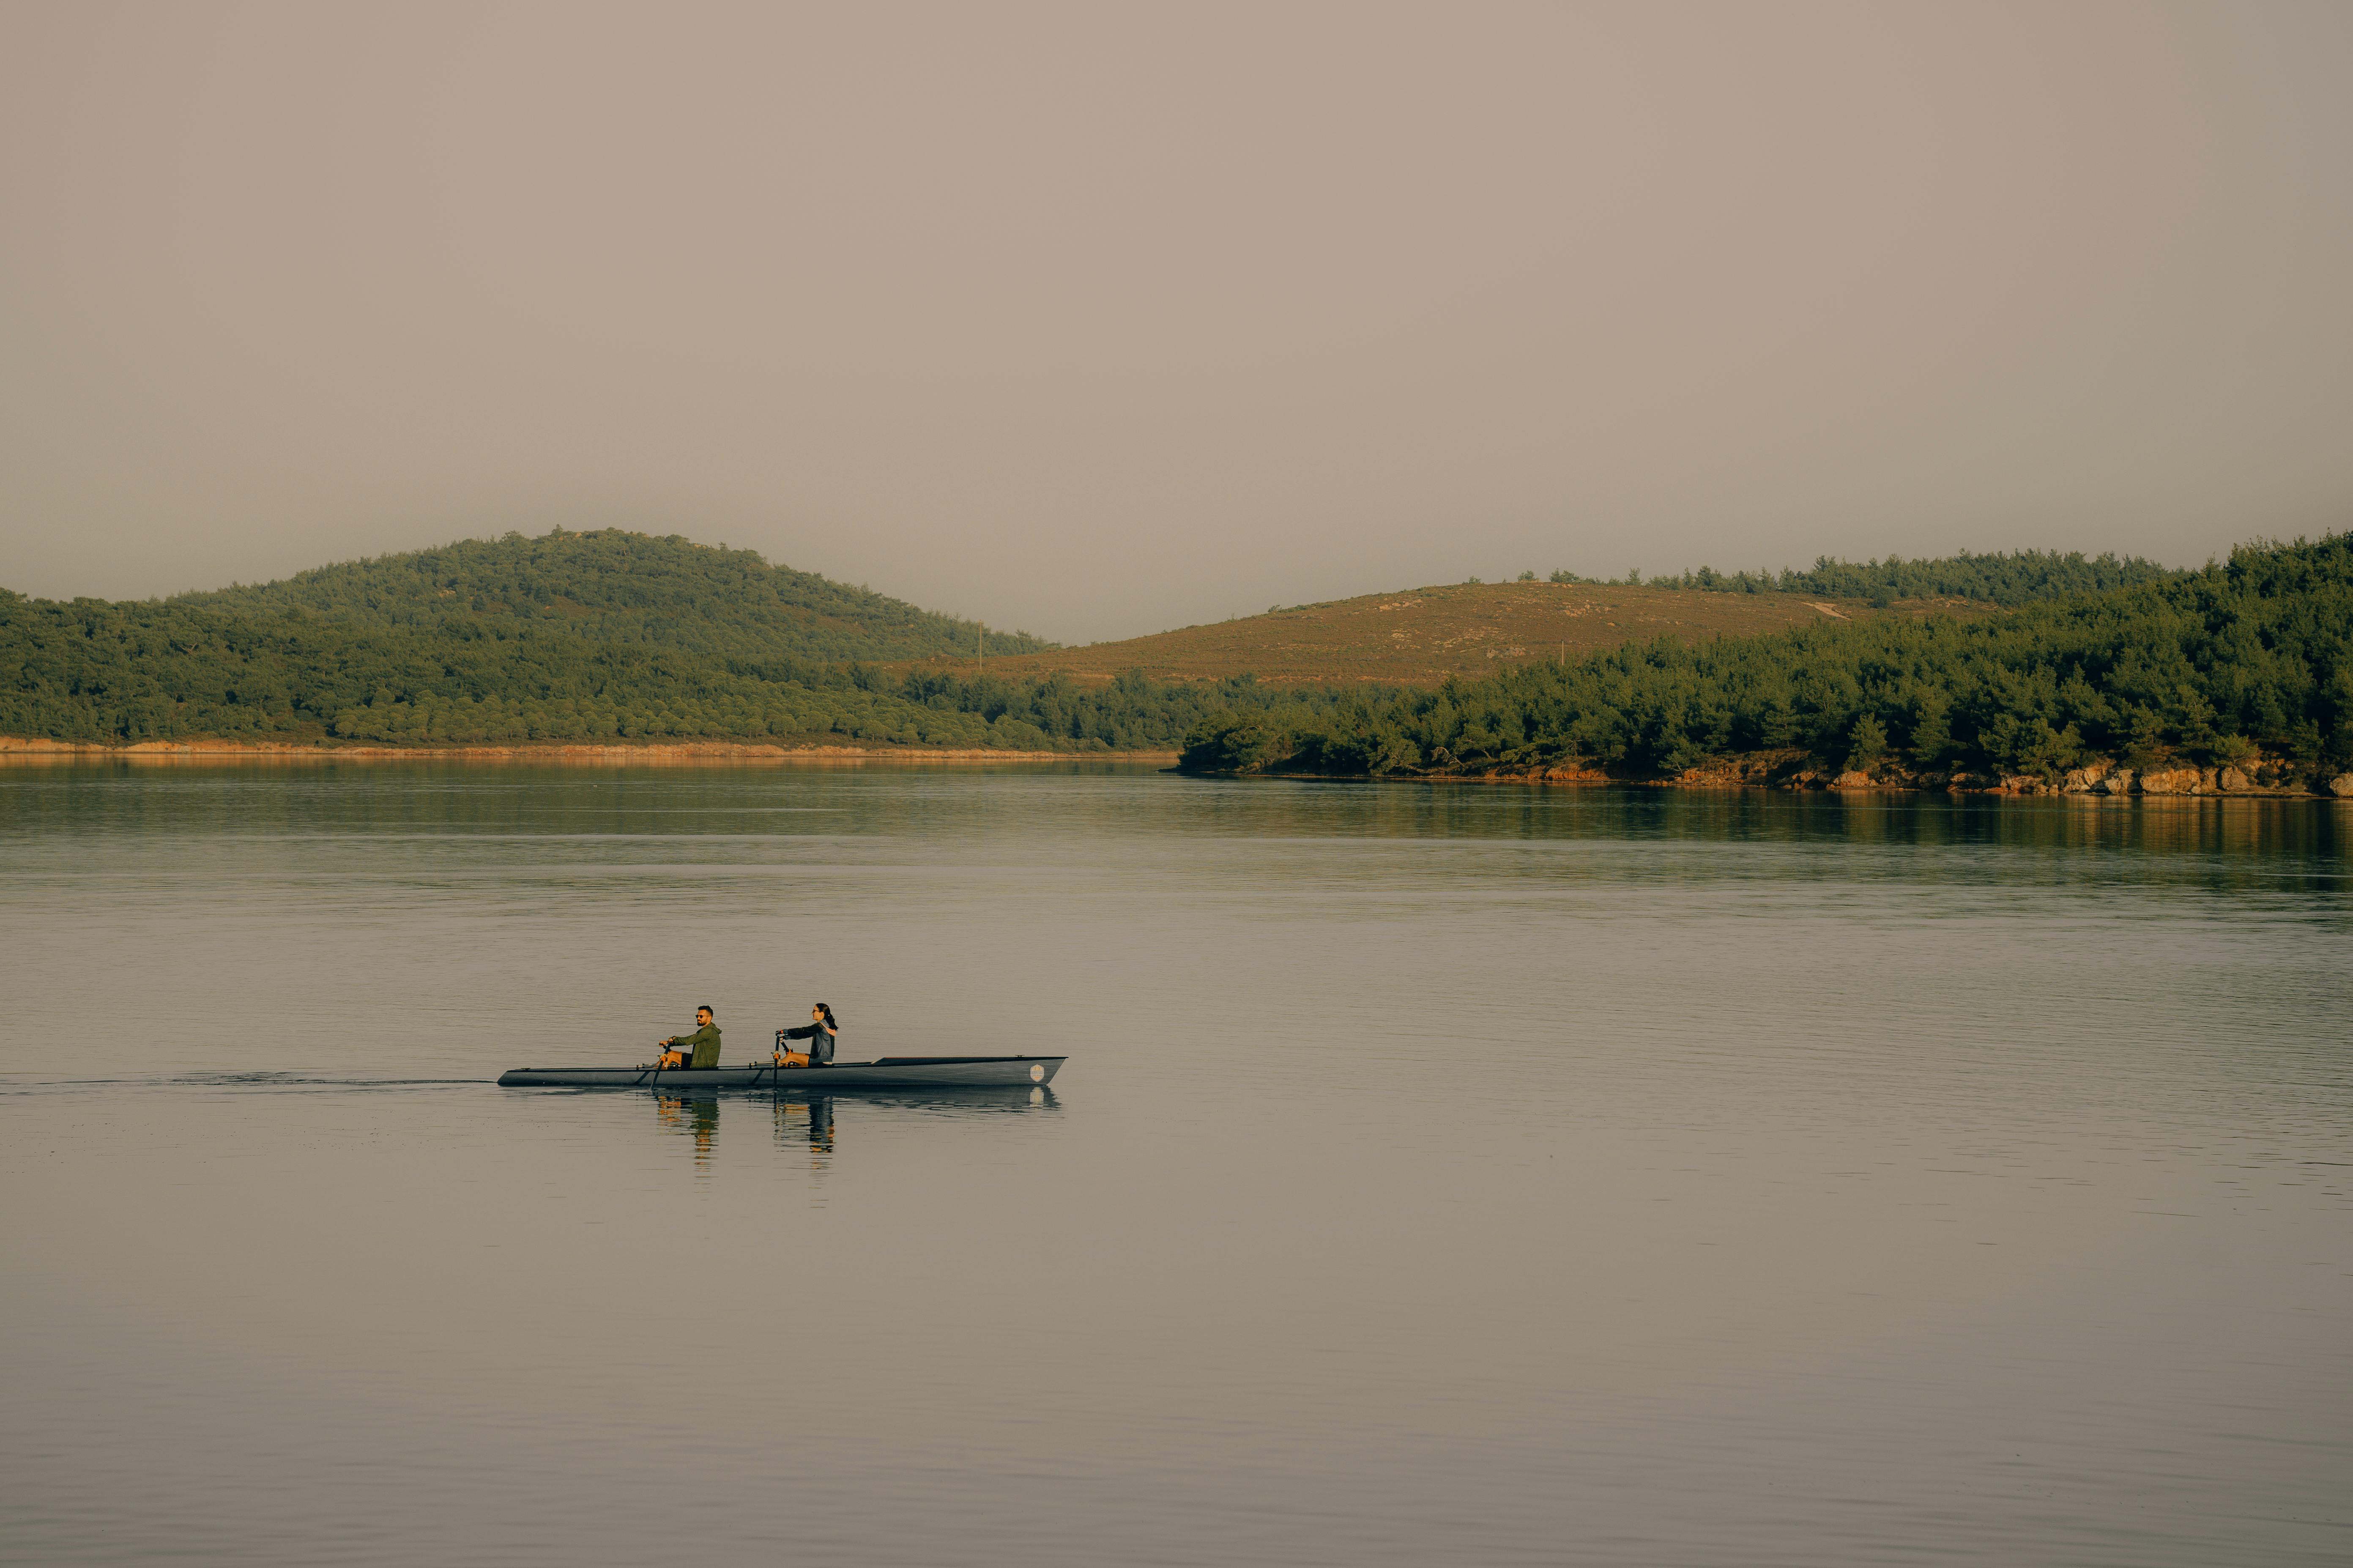 Two people in a canoe on a lake